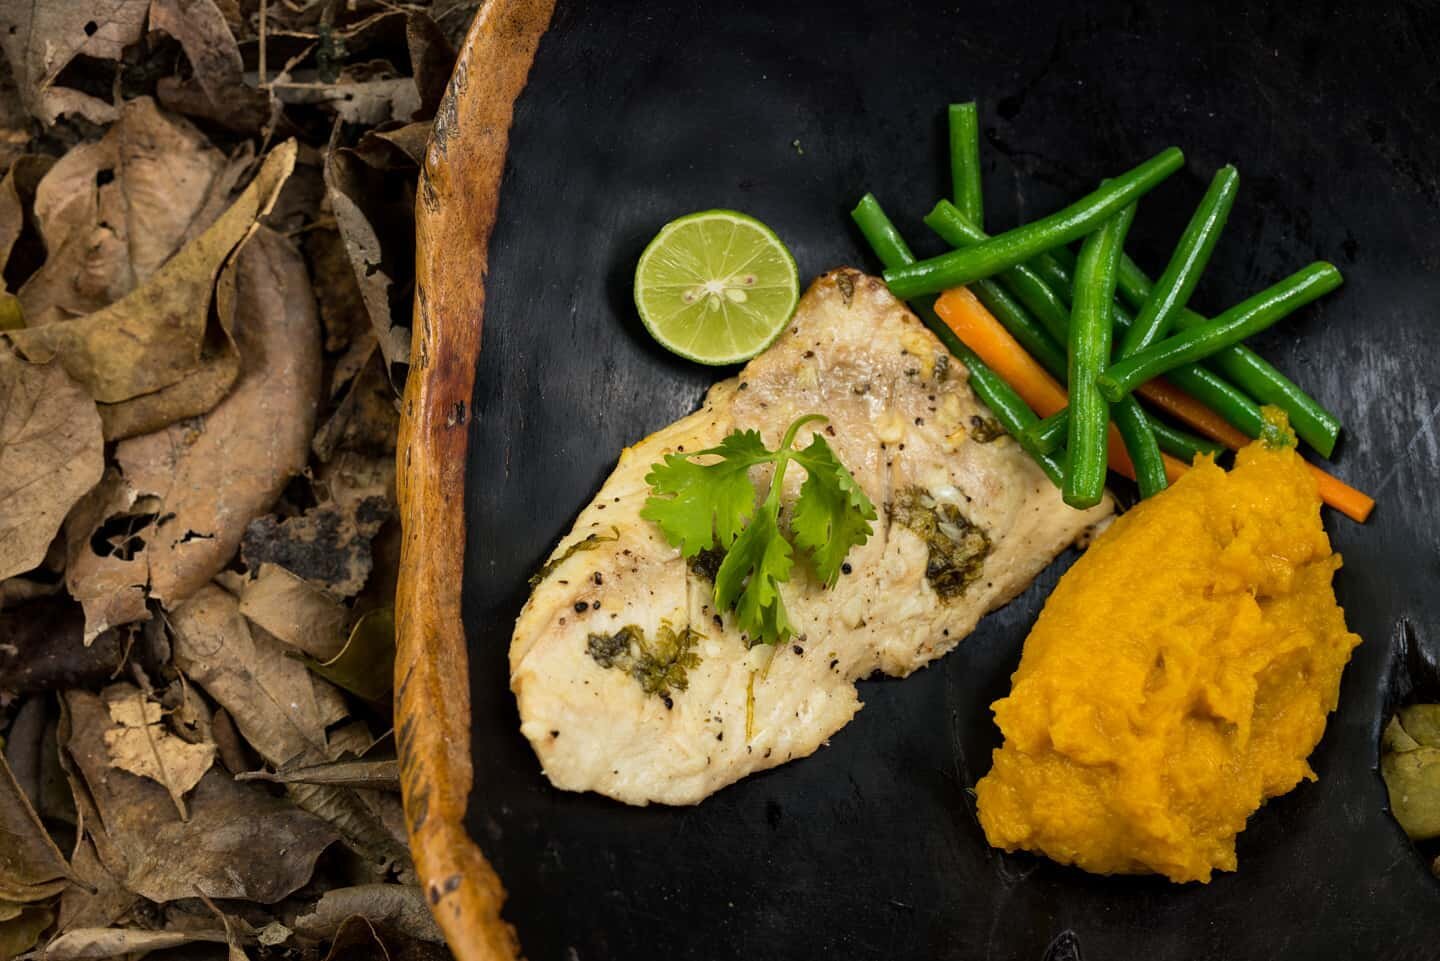 🍴🤤 Dinner time! Exploring the bush on safari certainly works up an appetite! Delicate and mild Nile Perch with buttery pumpkin mash and steamed fresh vegetables. Delicious!
.
What would you like to see on your safari menu? We're always interested i